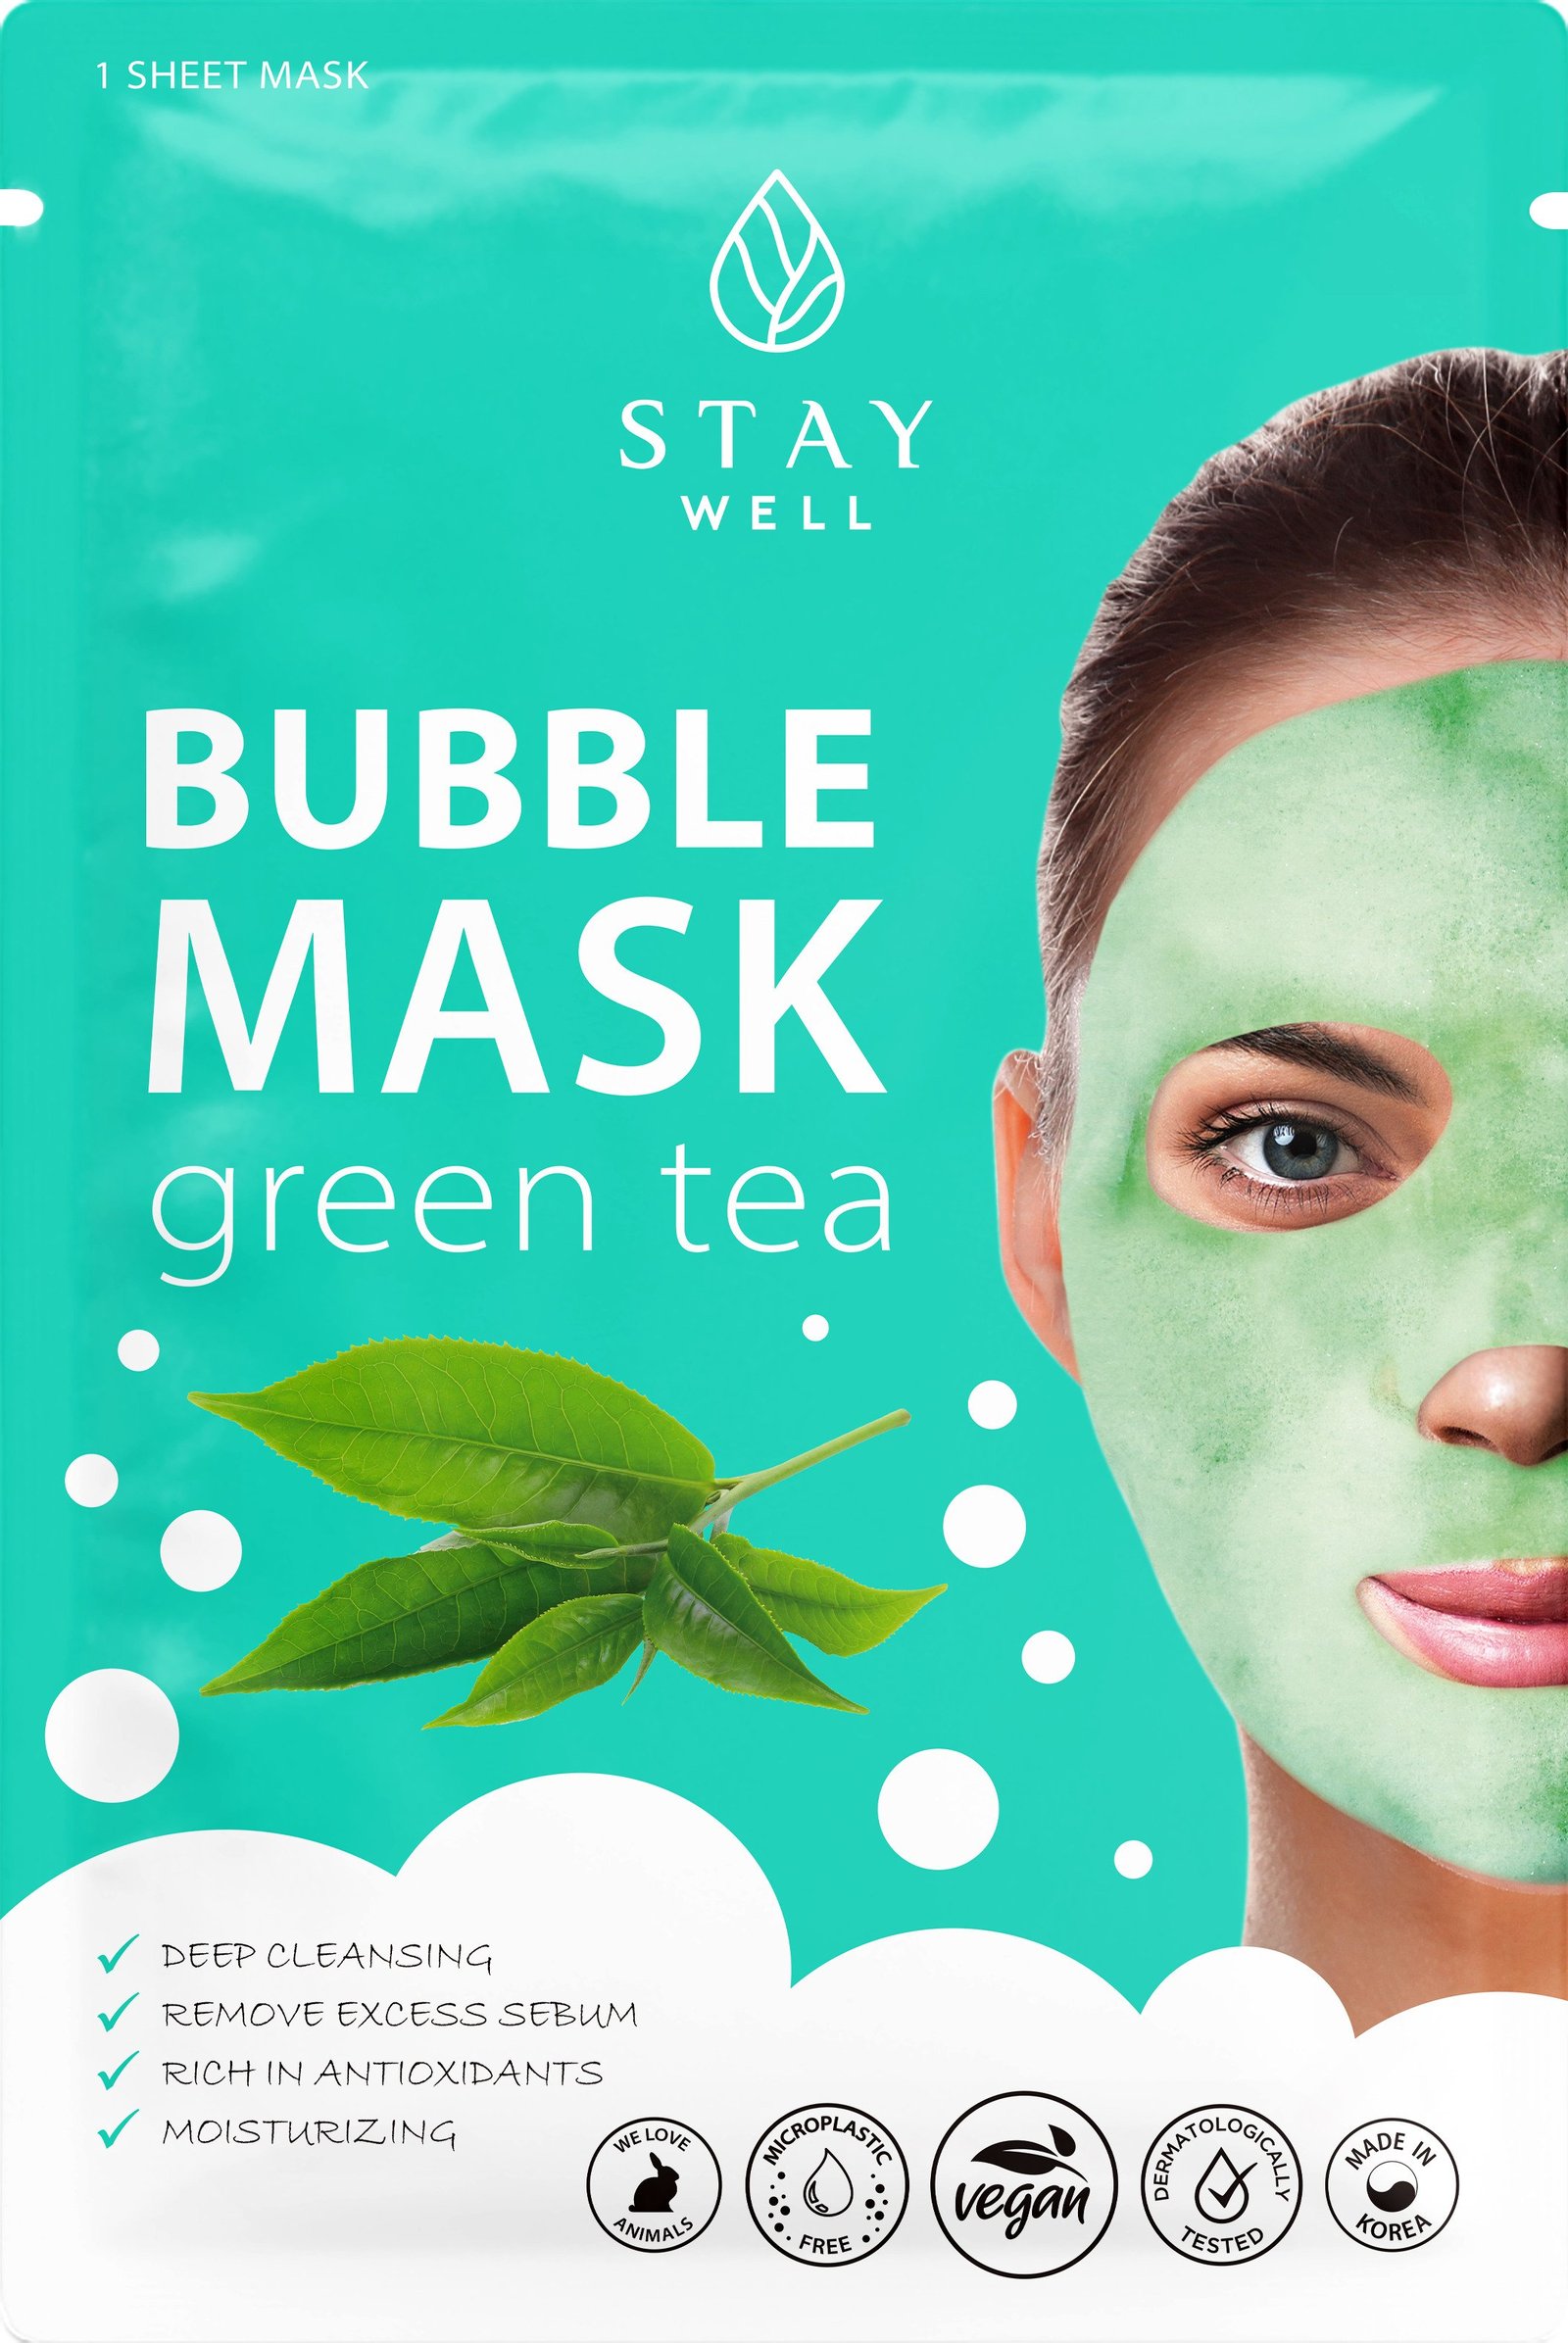 STAY Well Deep Cleansing Bubble Mask Green Tea 1 st